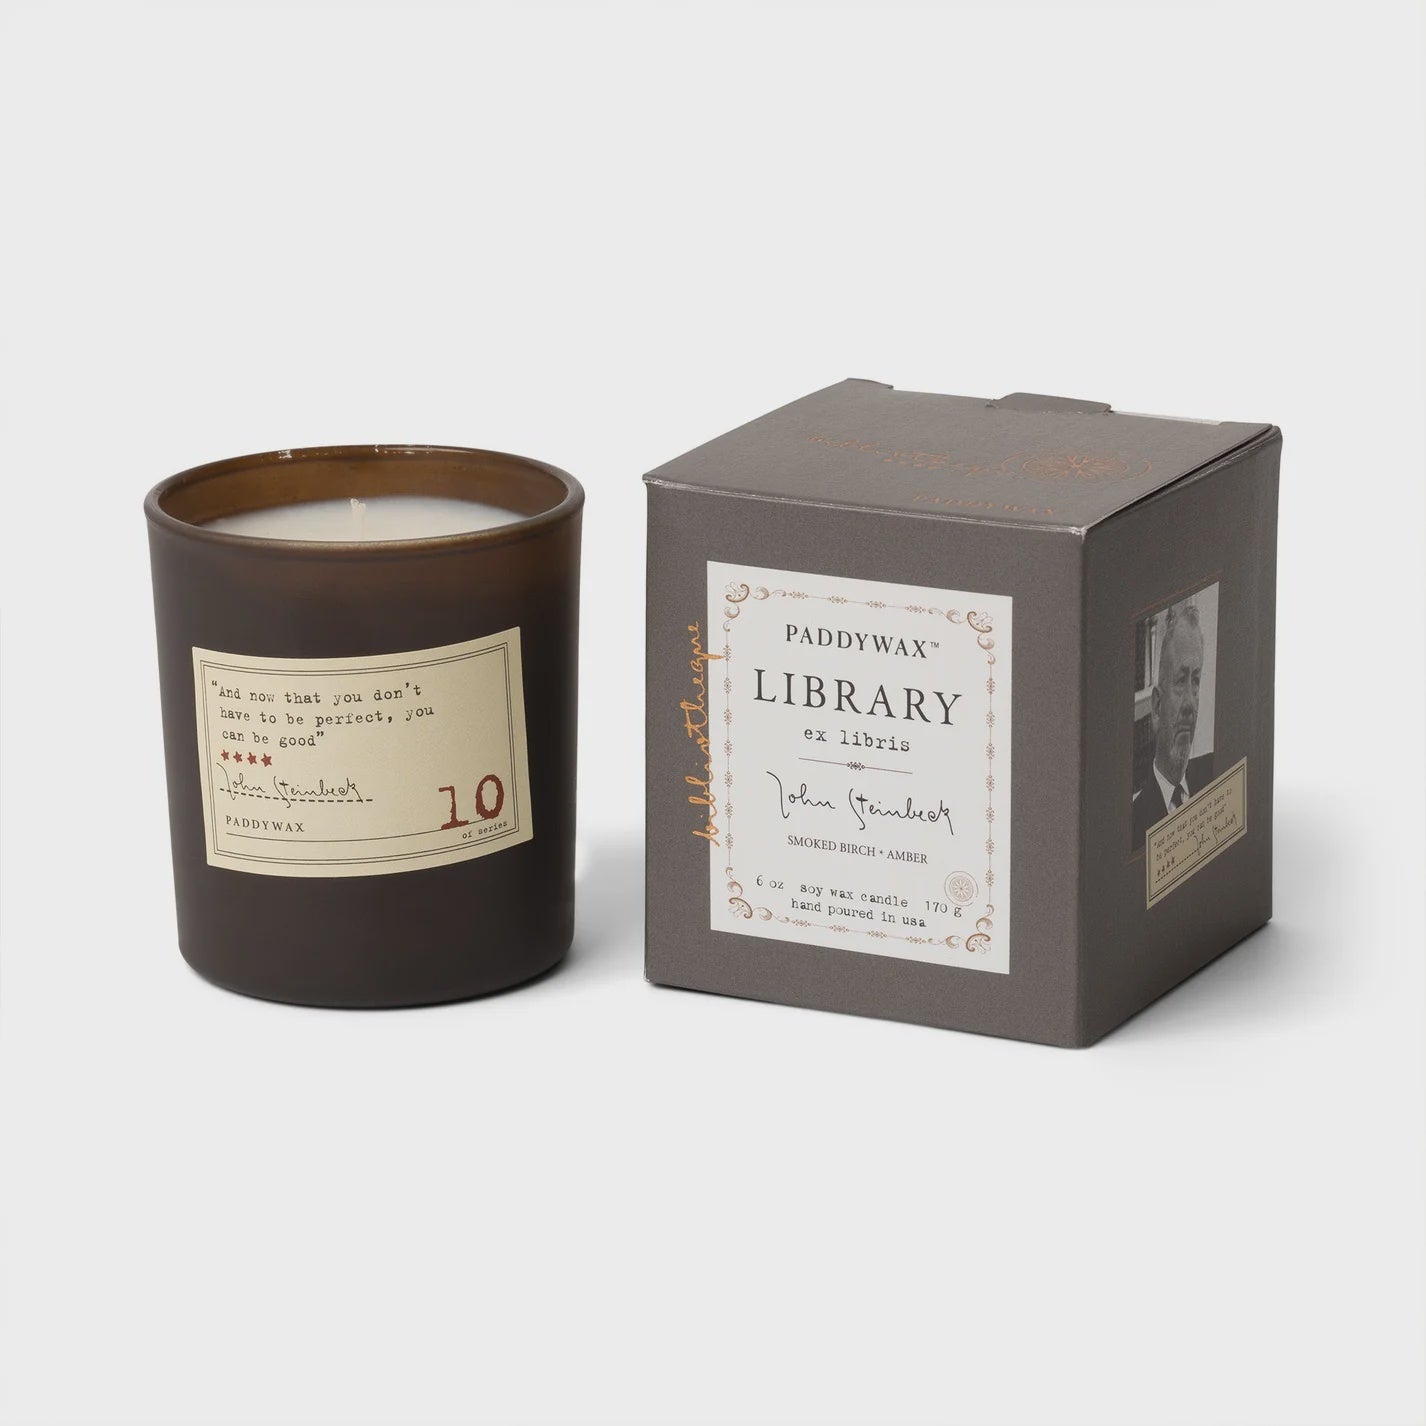 Paddywax Library Boxed Glass Candle - Smoked Birch & Amber